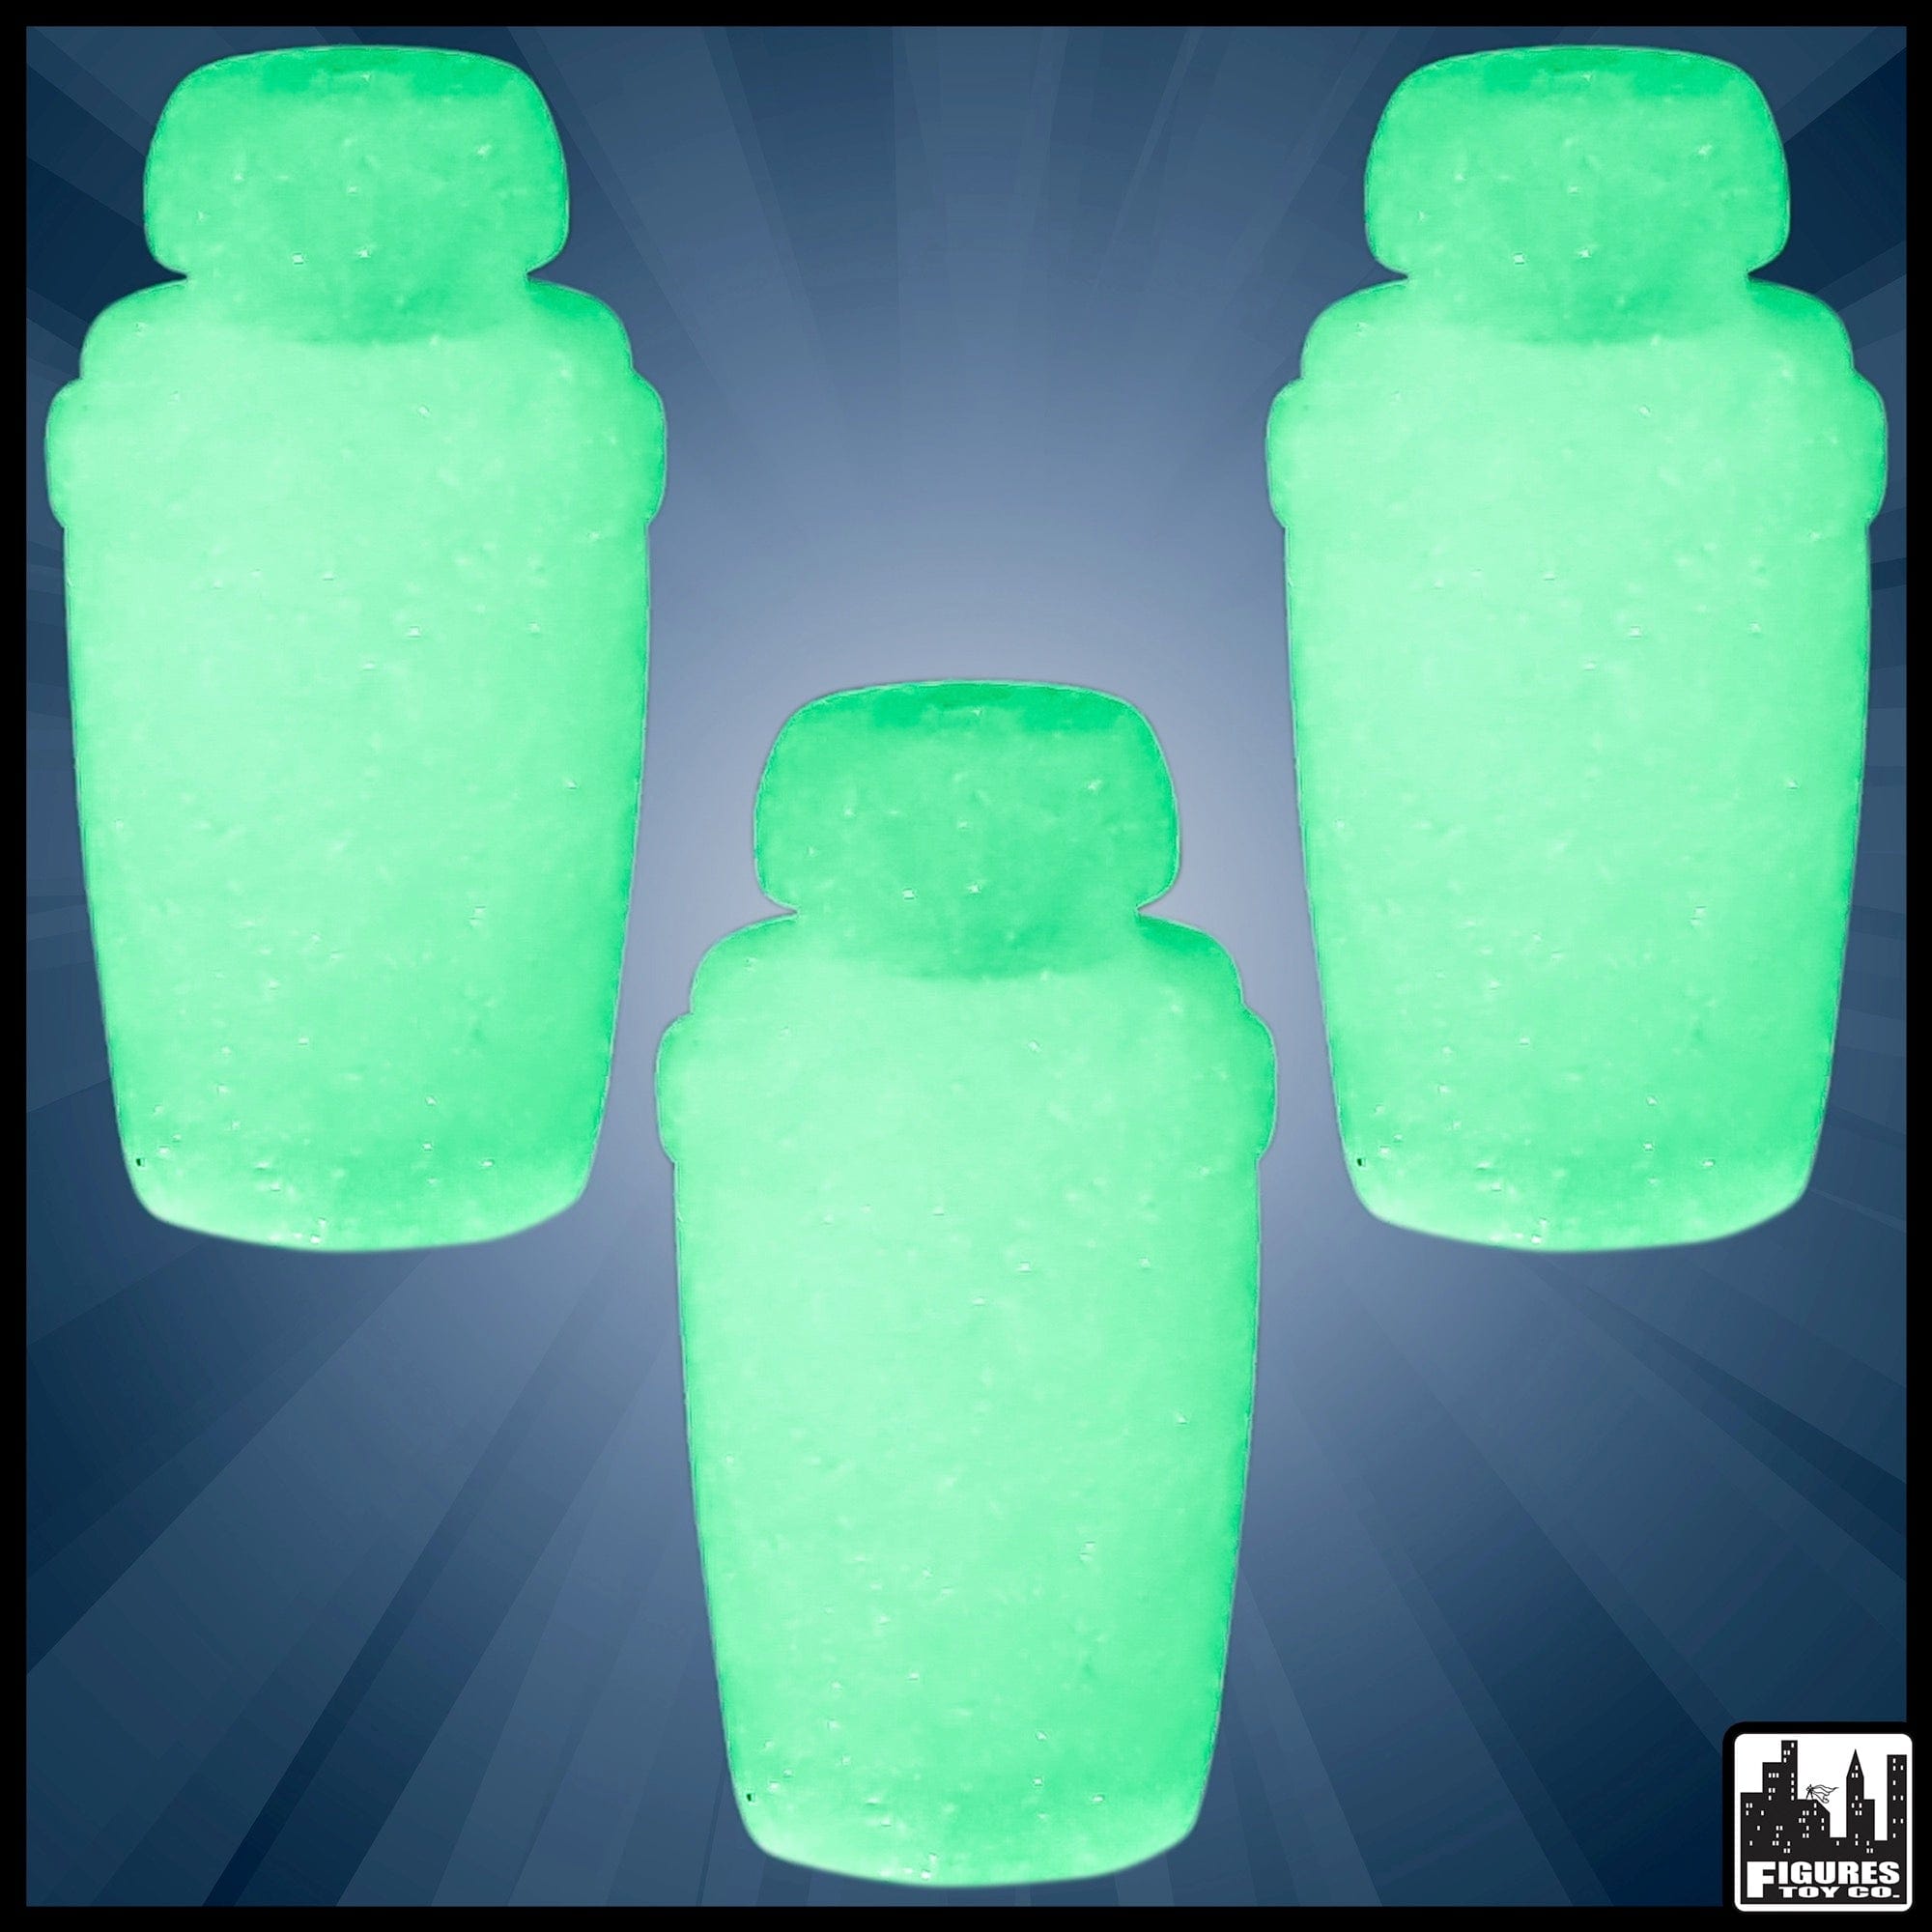 Set of 3 Glow In The Dark Urns for WWE Wrestling Action Figures